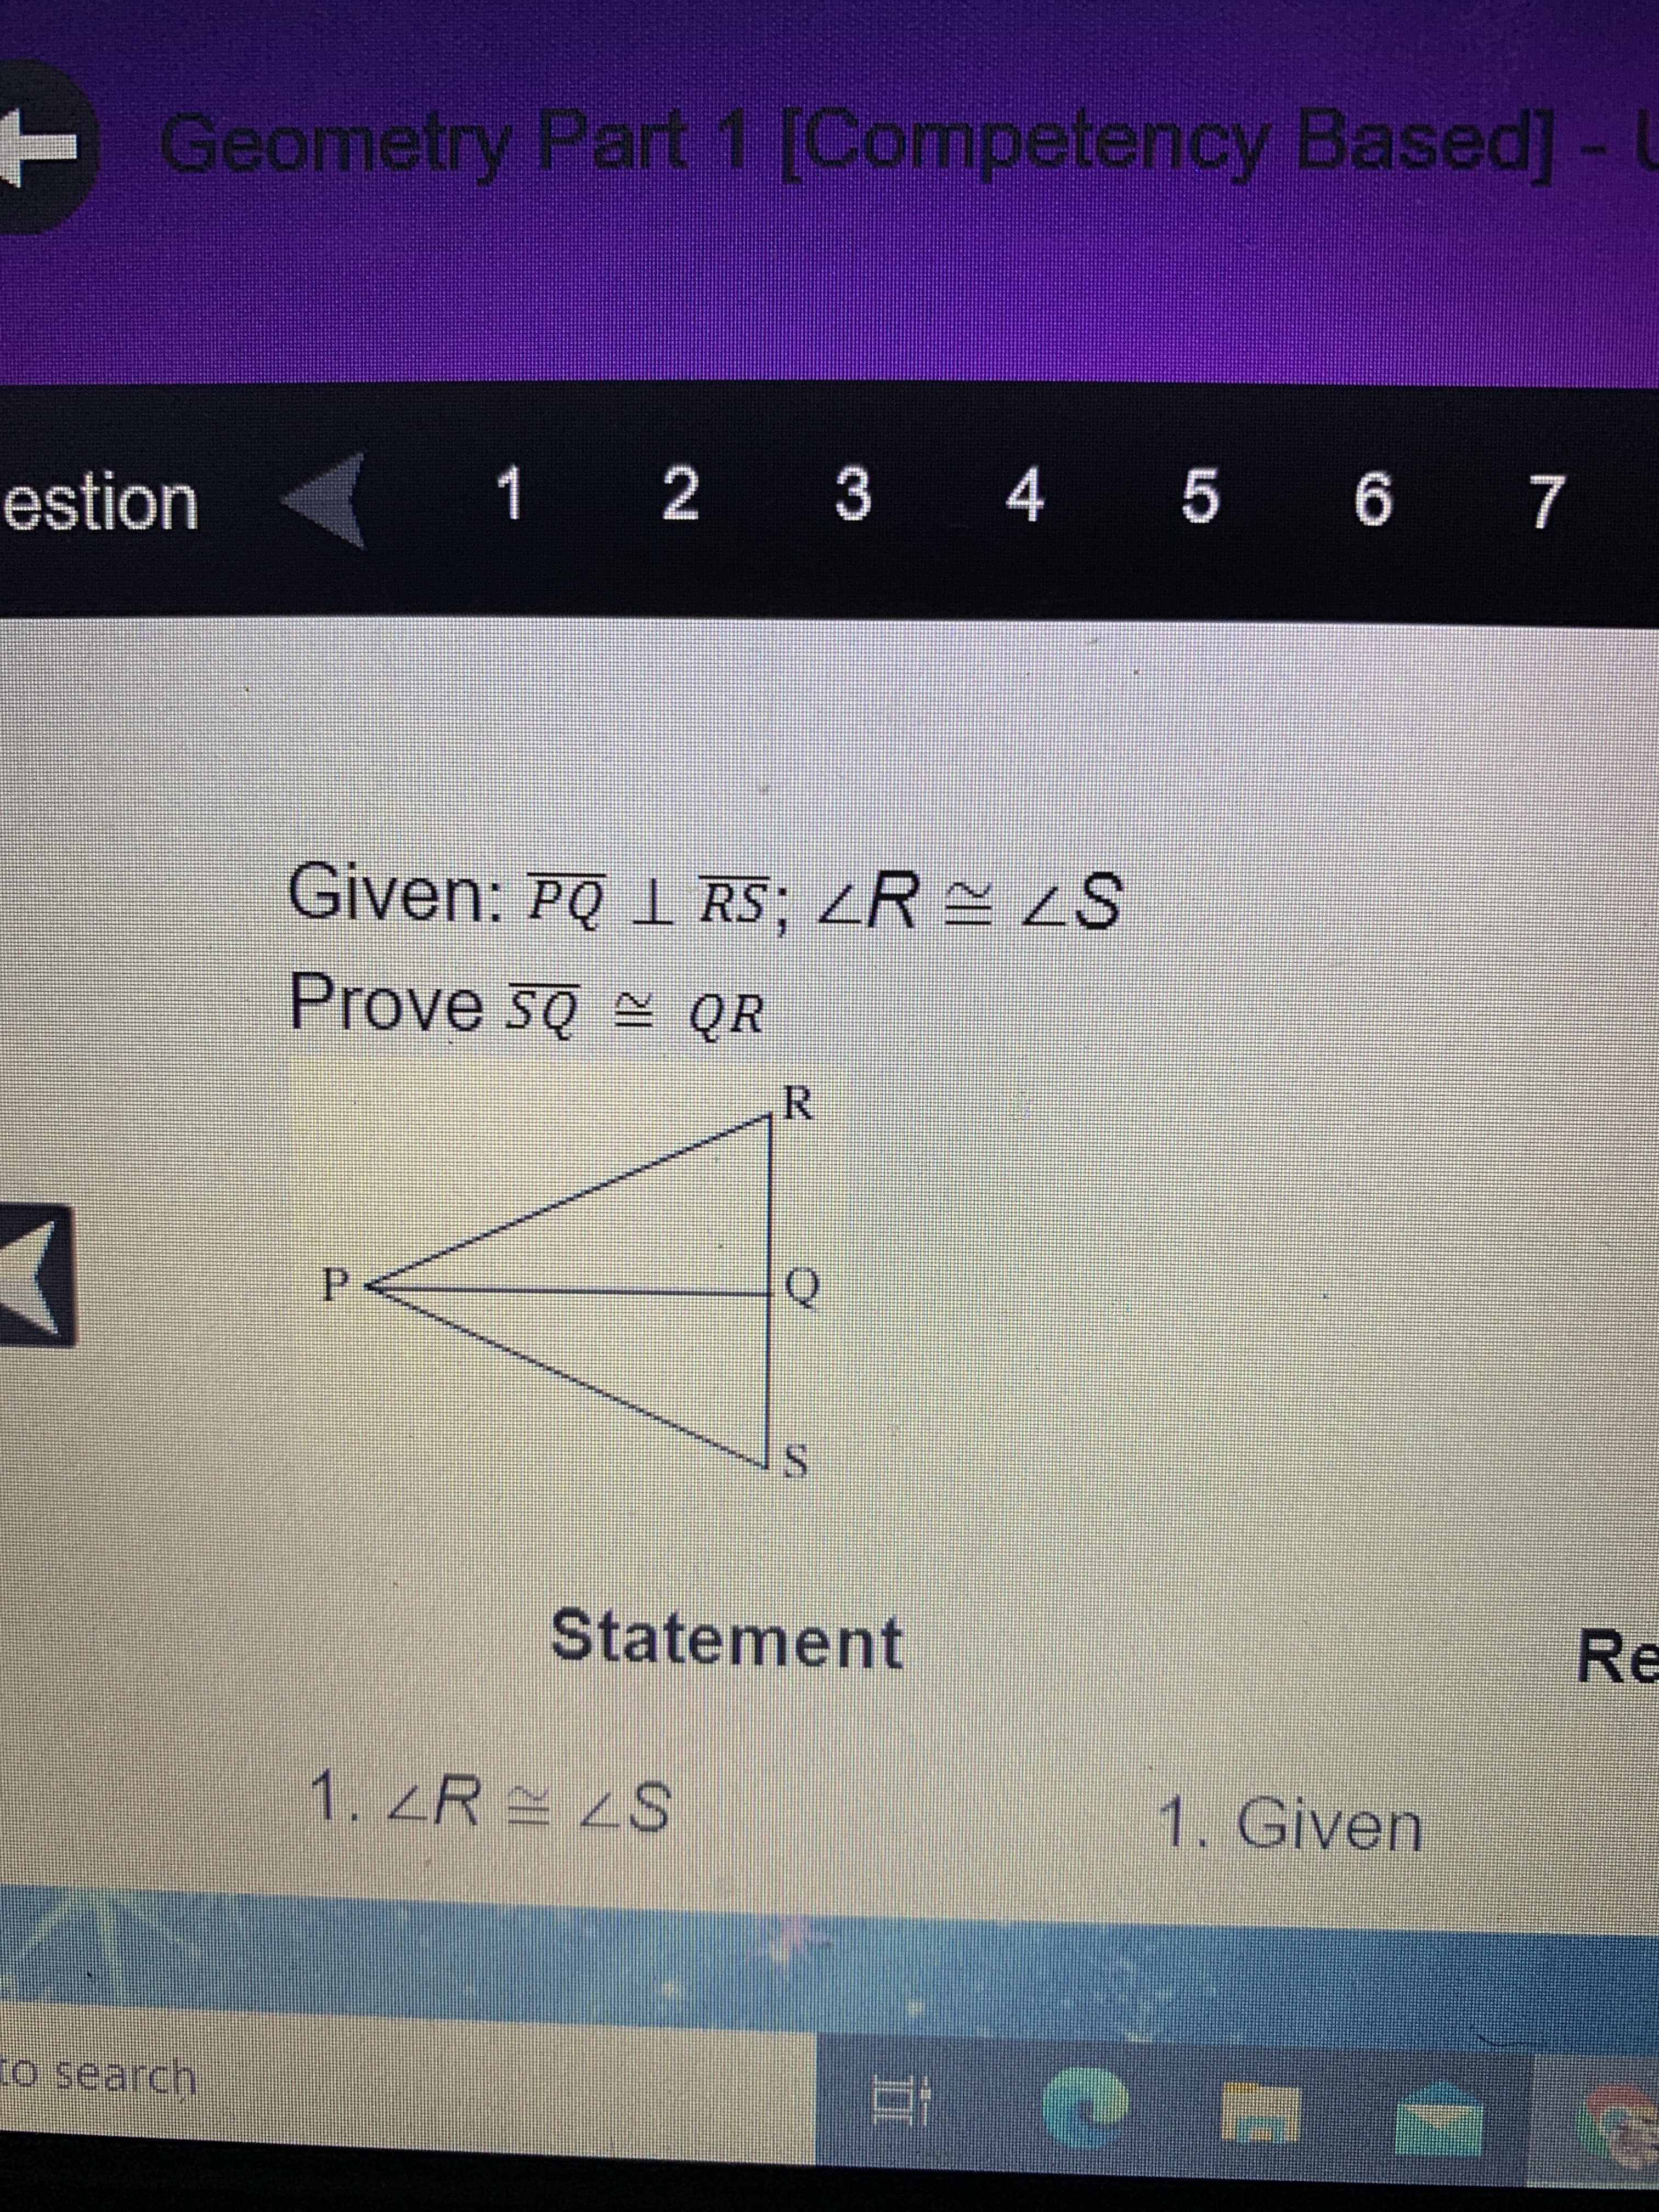 R.
TGeometry Part 1 [Competency Based]-U
estion
1 2 3 4 5 6 7
Given: PQ 1 RS; R LS
Prove są QR
P.
S.
Statement
Re
1. ZR = 2S
1. Given
Co search
